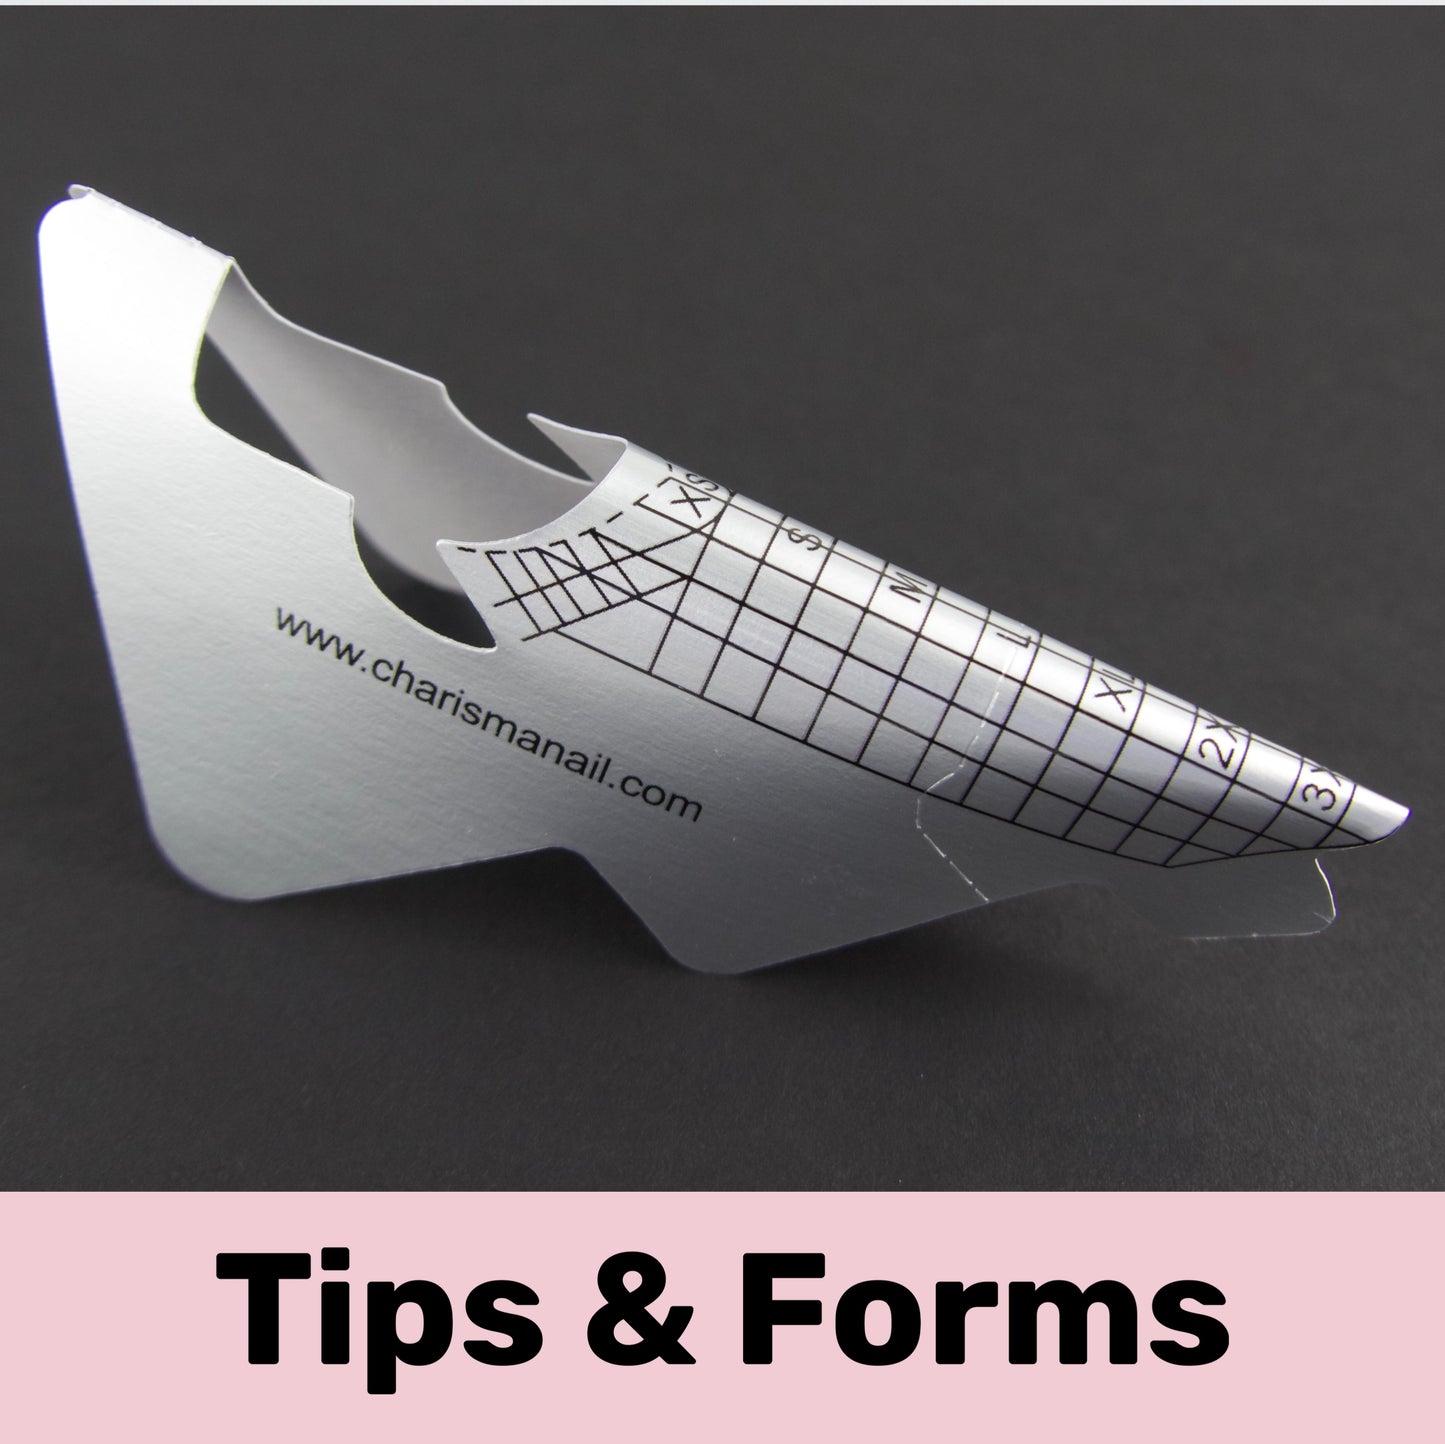 Tips & Forms